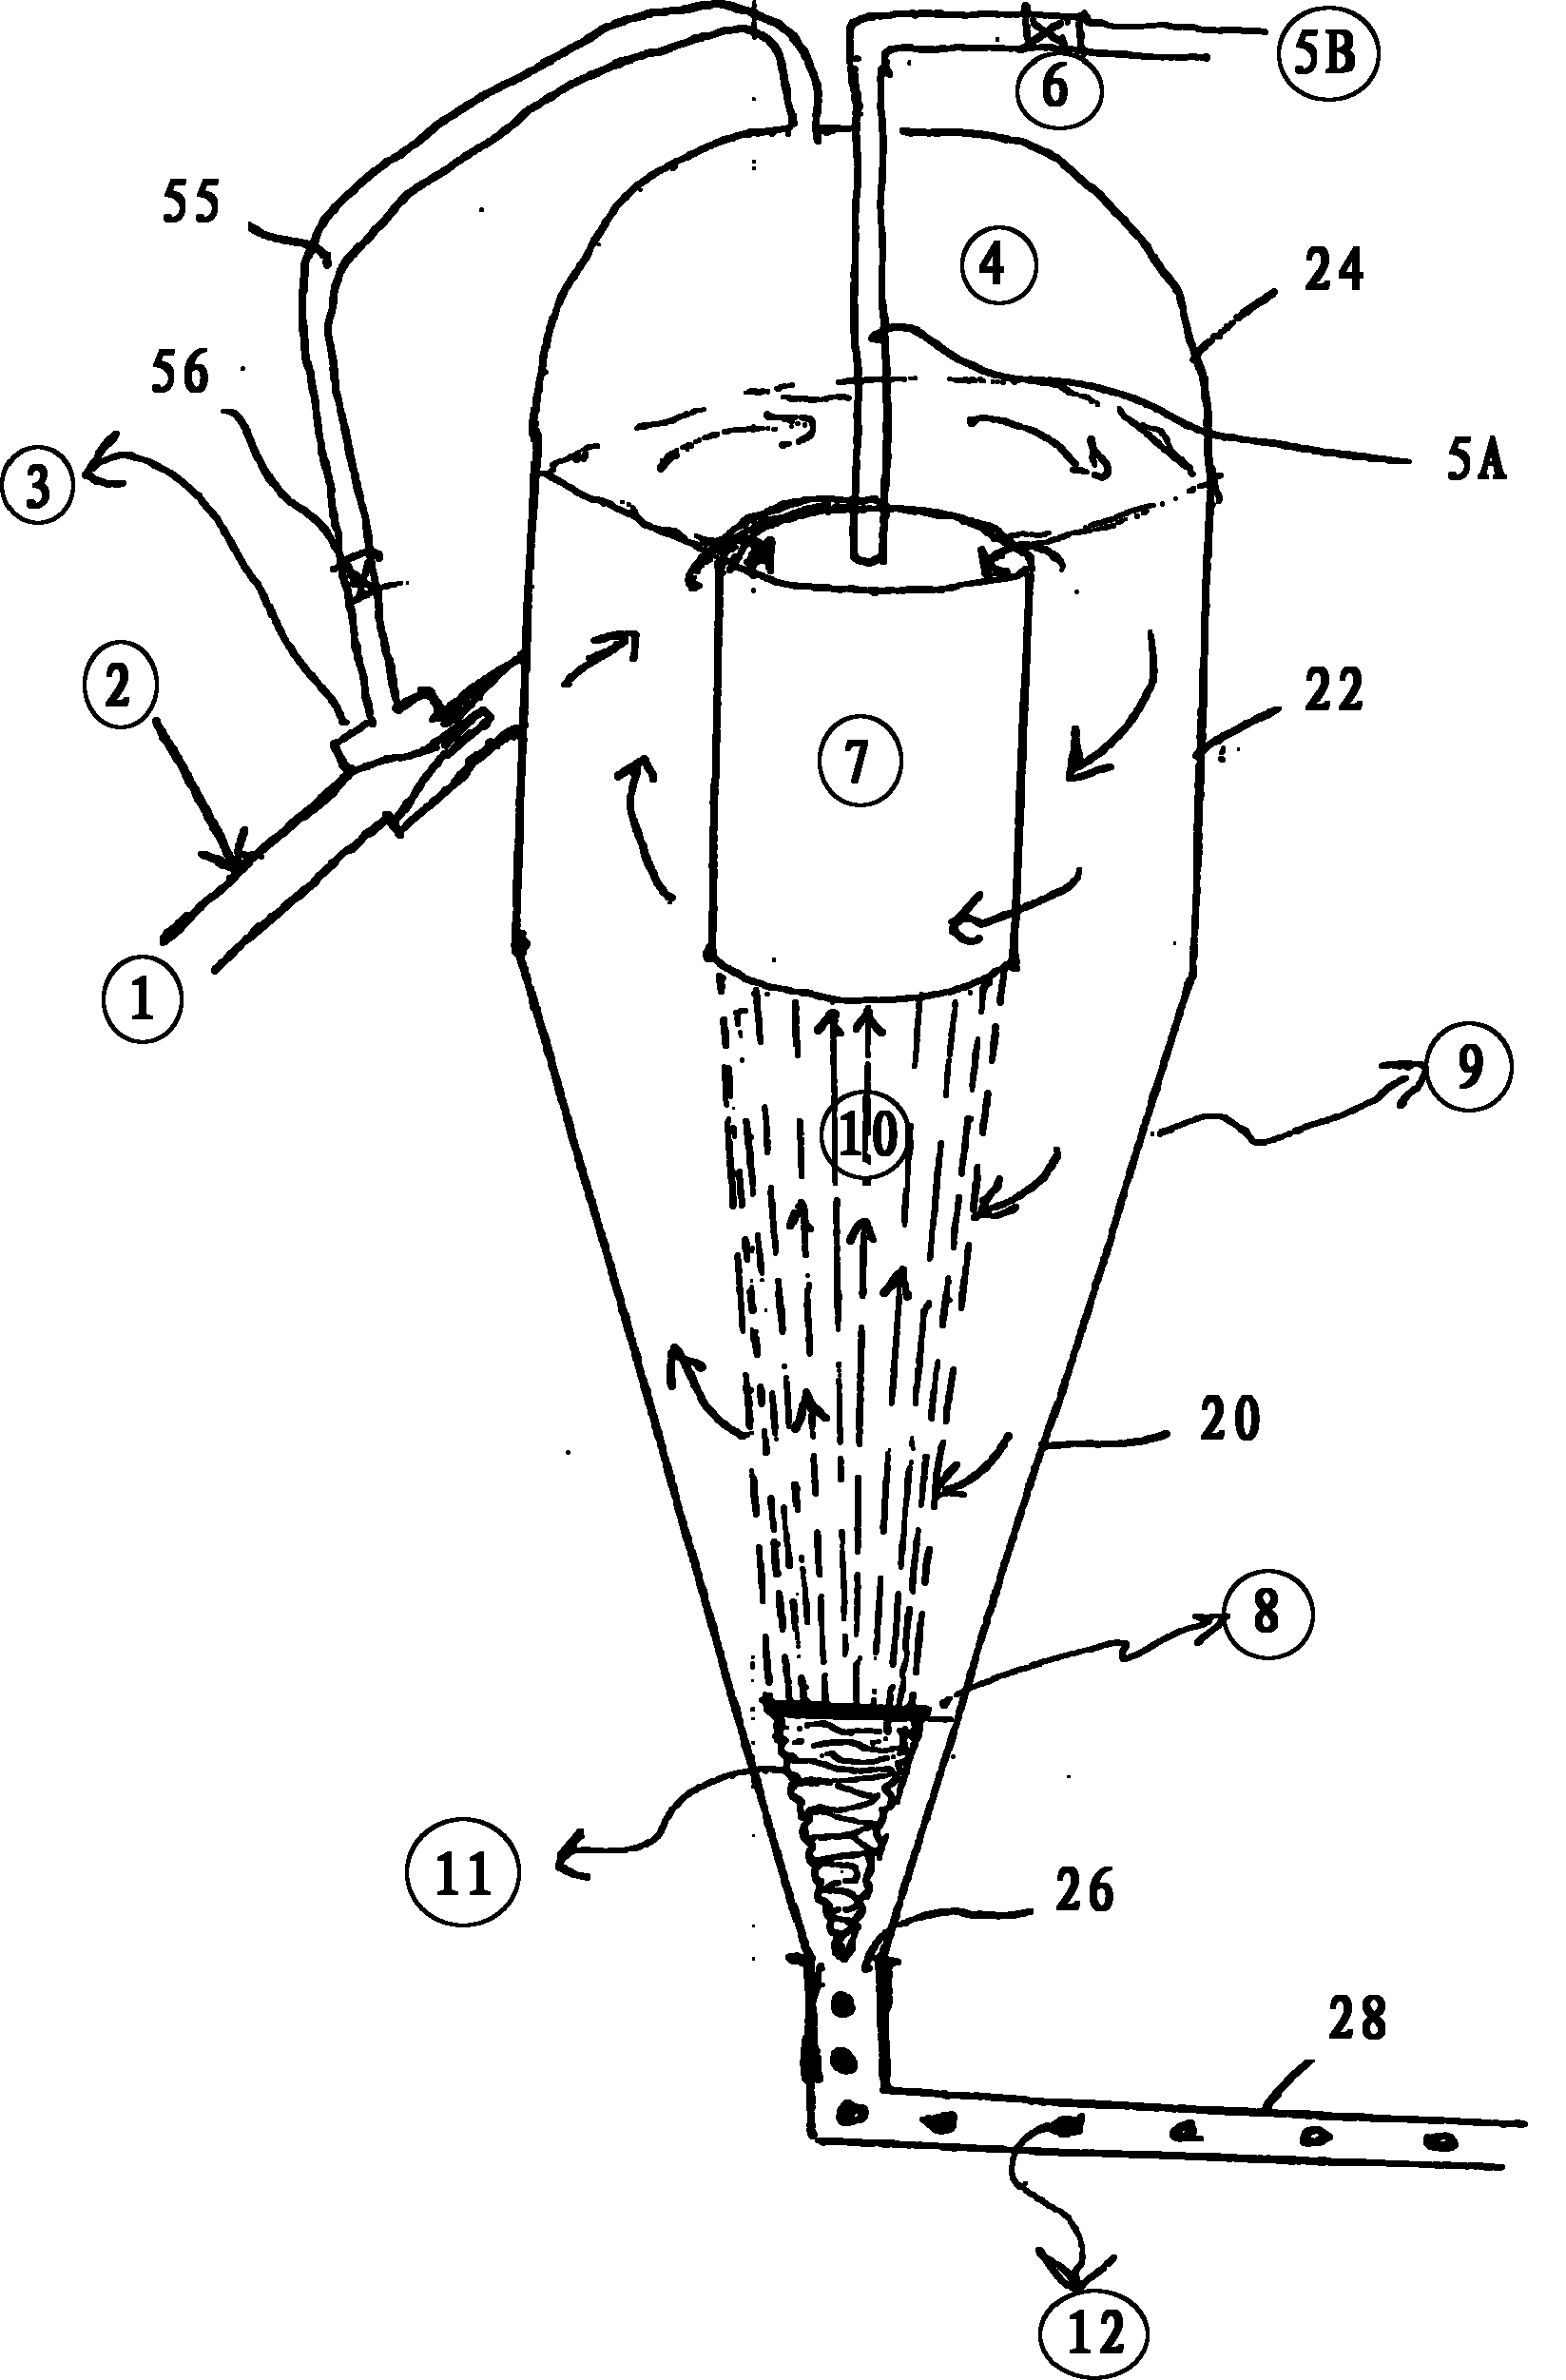 Apparatus and method for separation of phases in a multiphase flow